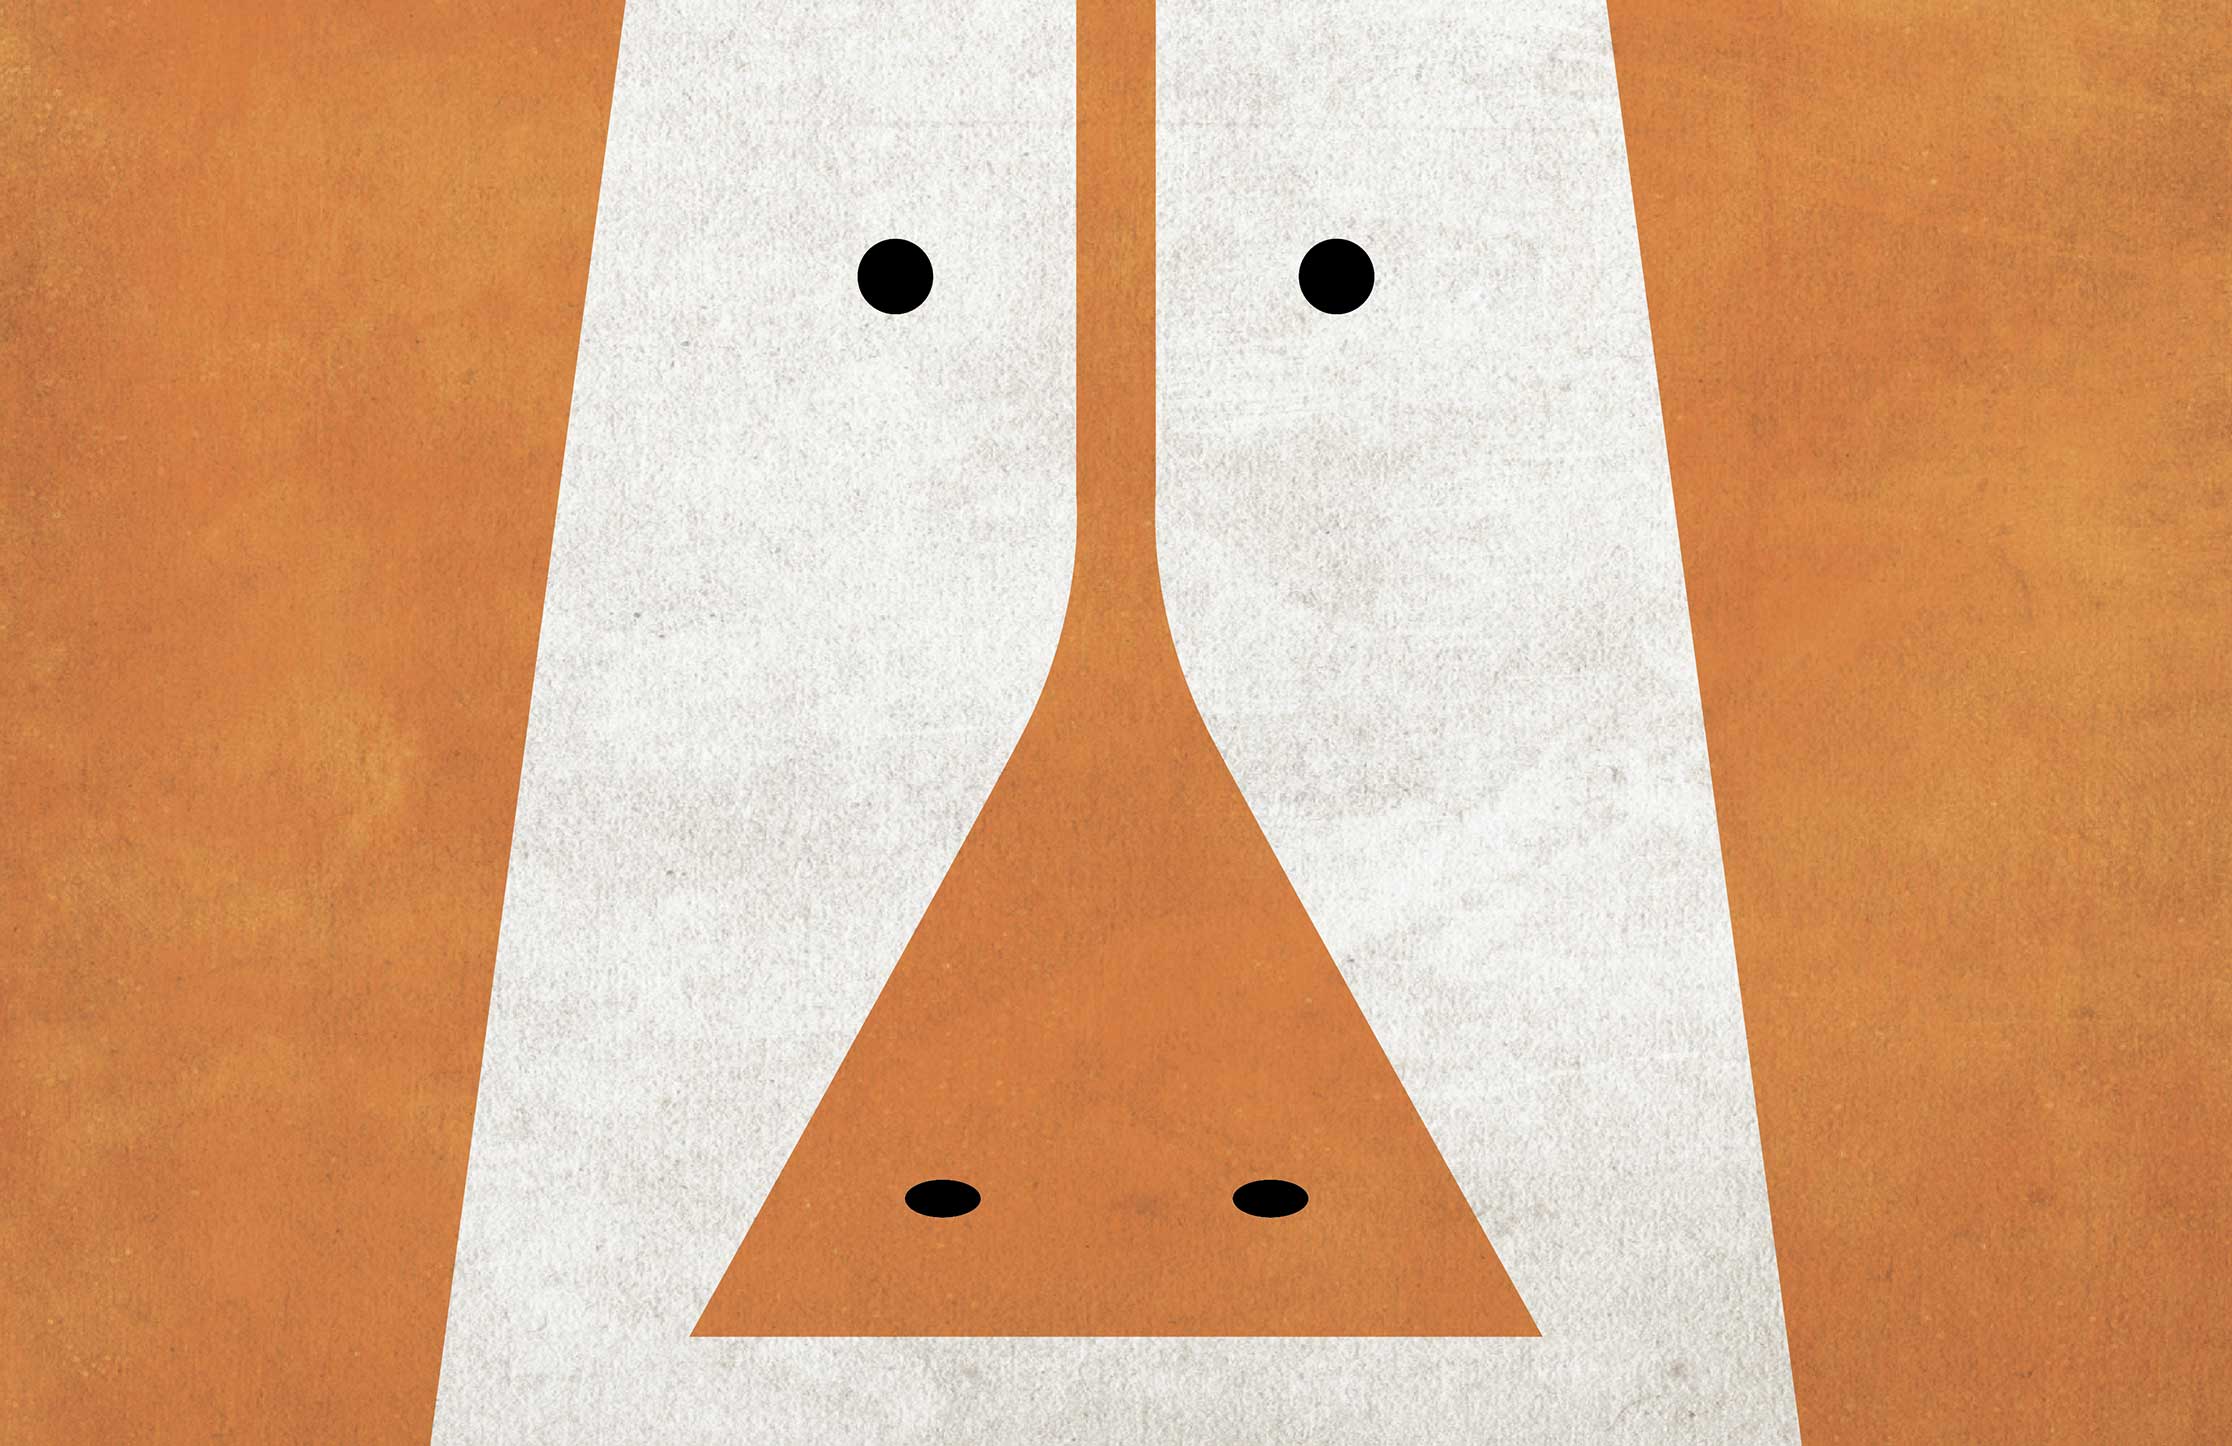 A “Design Zoo”: Federico Babina’s creativity for “What’s in a Lamp?”